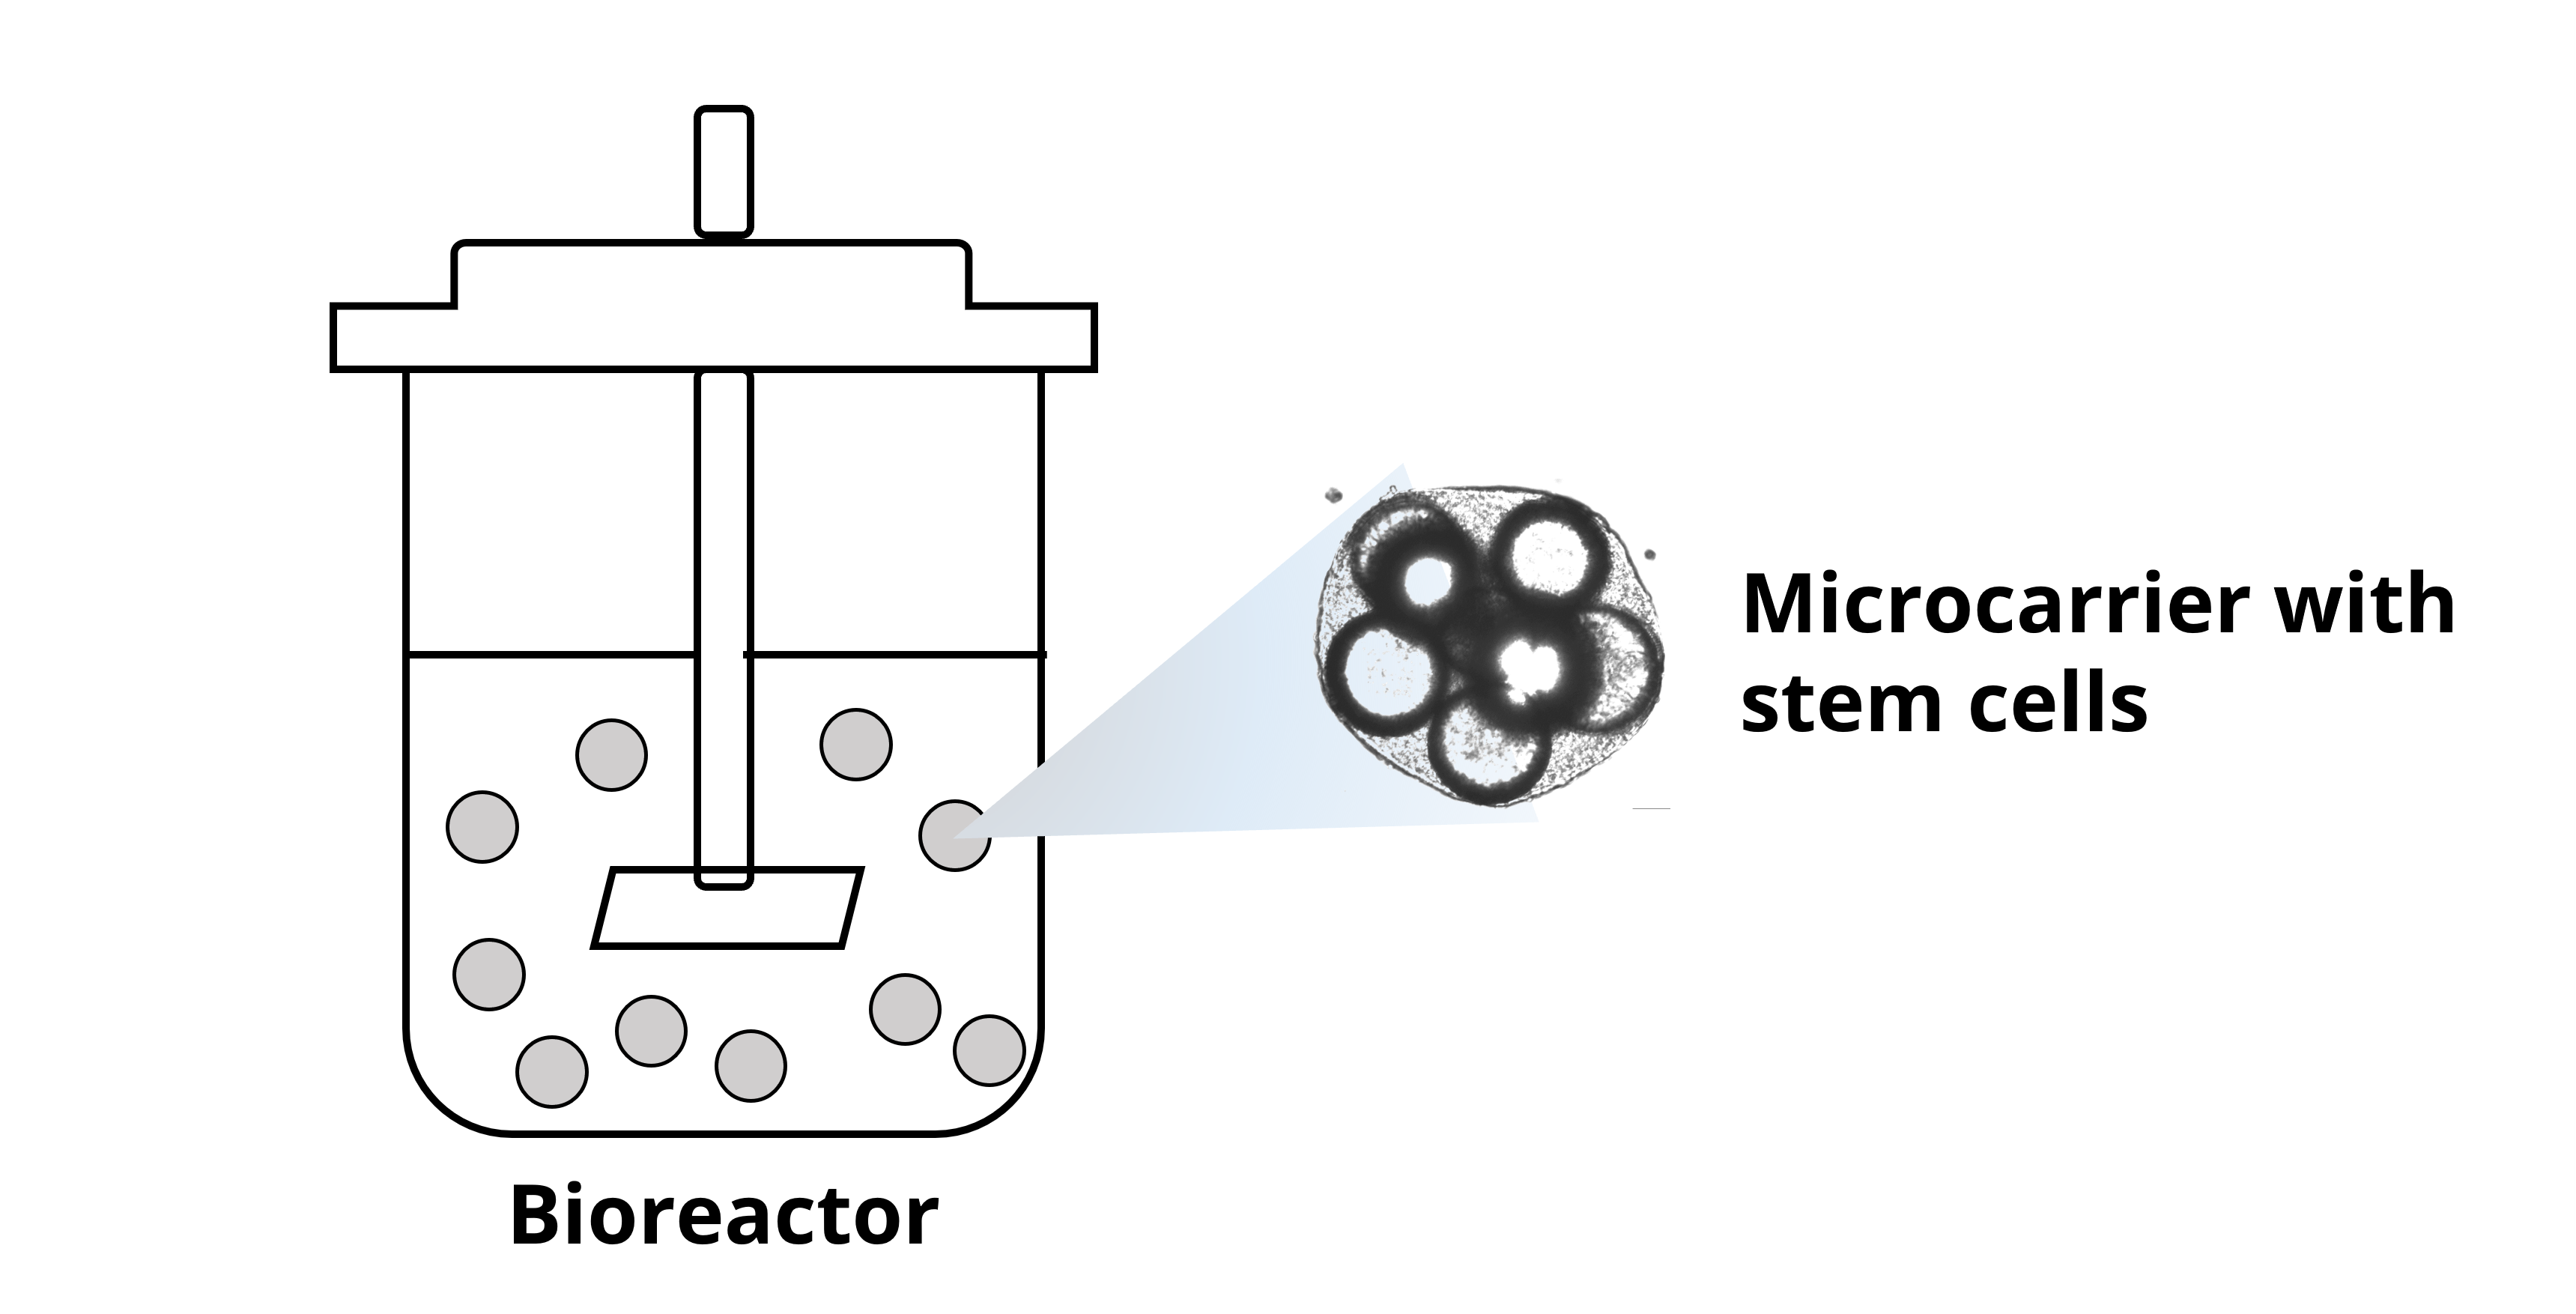 Microcarrier-based Bioreactor System